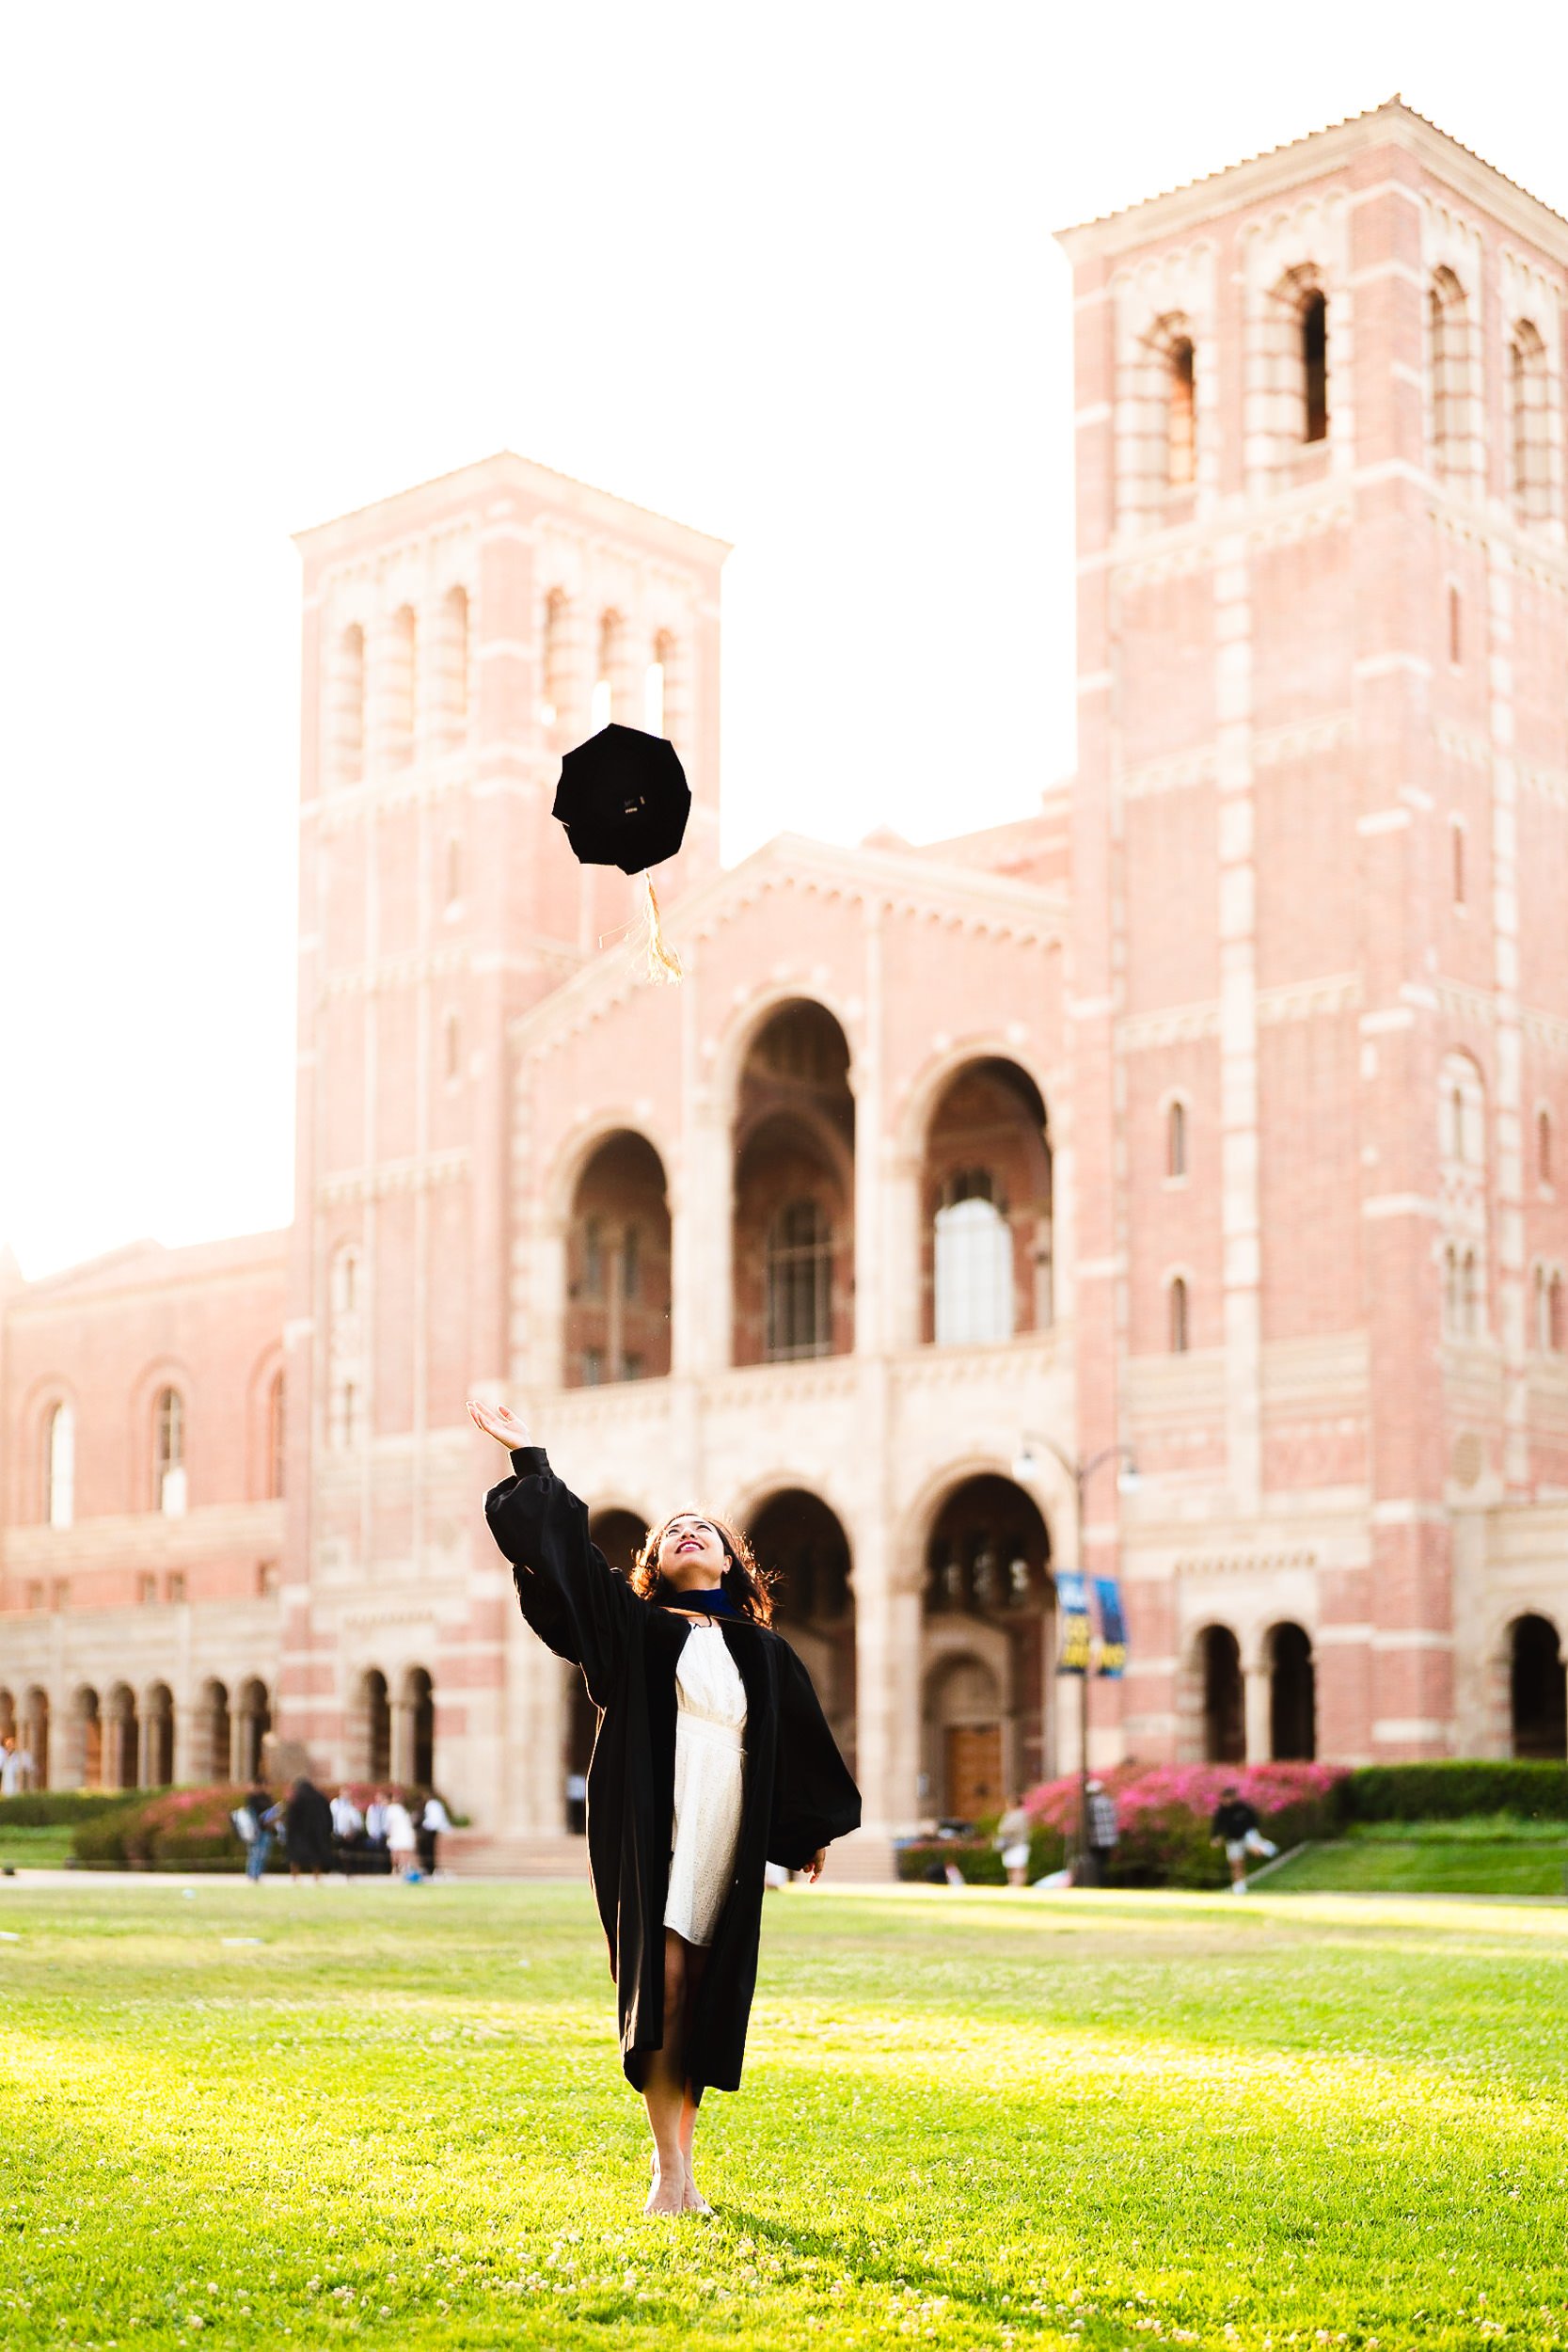 UCLA Doctorate Graduate tossing cap at Royce Hall at sunset